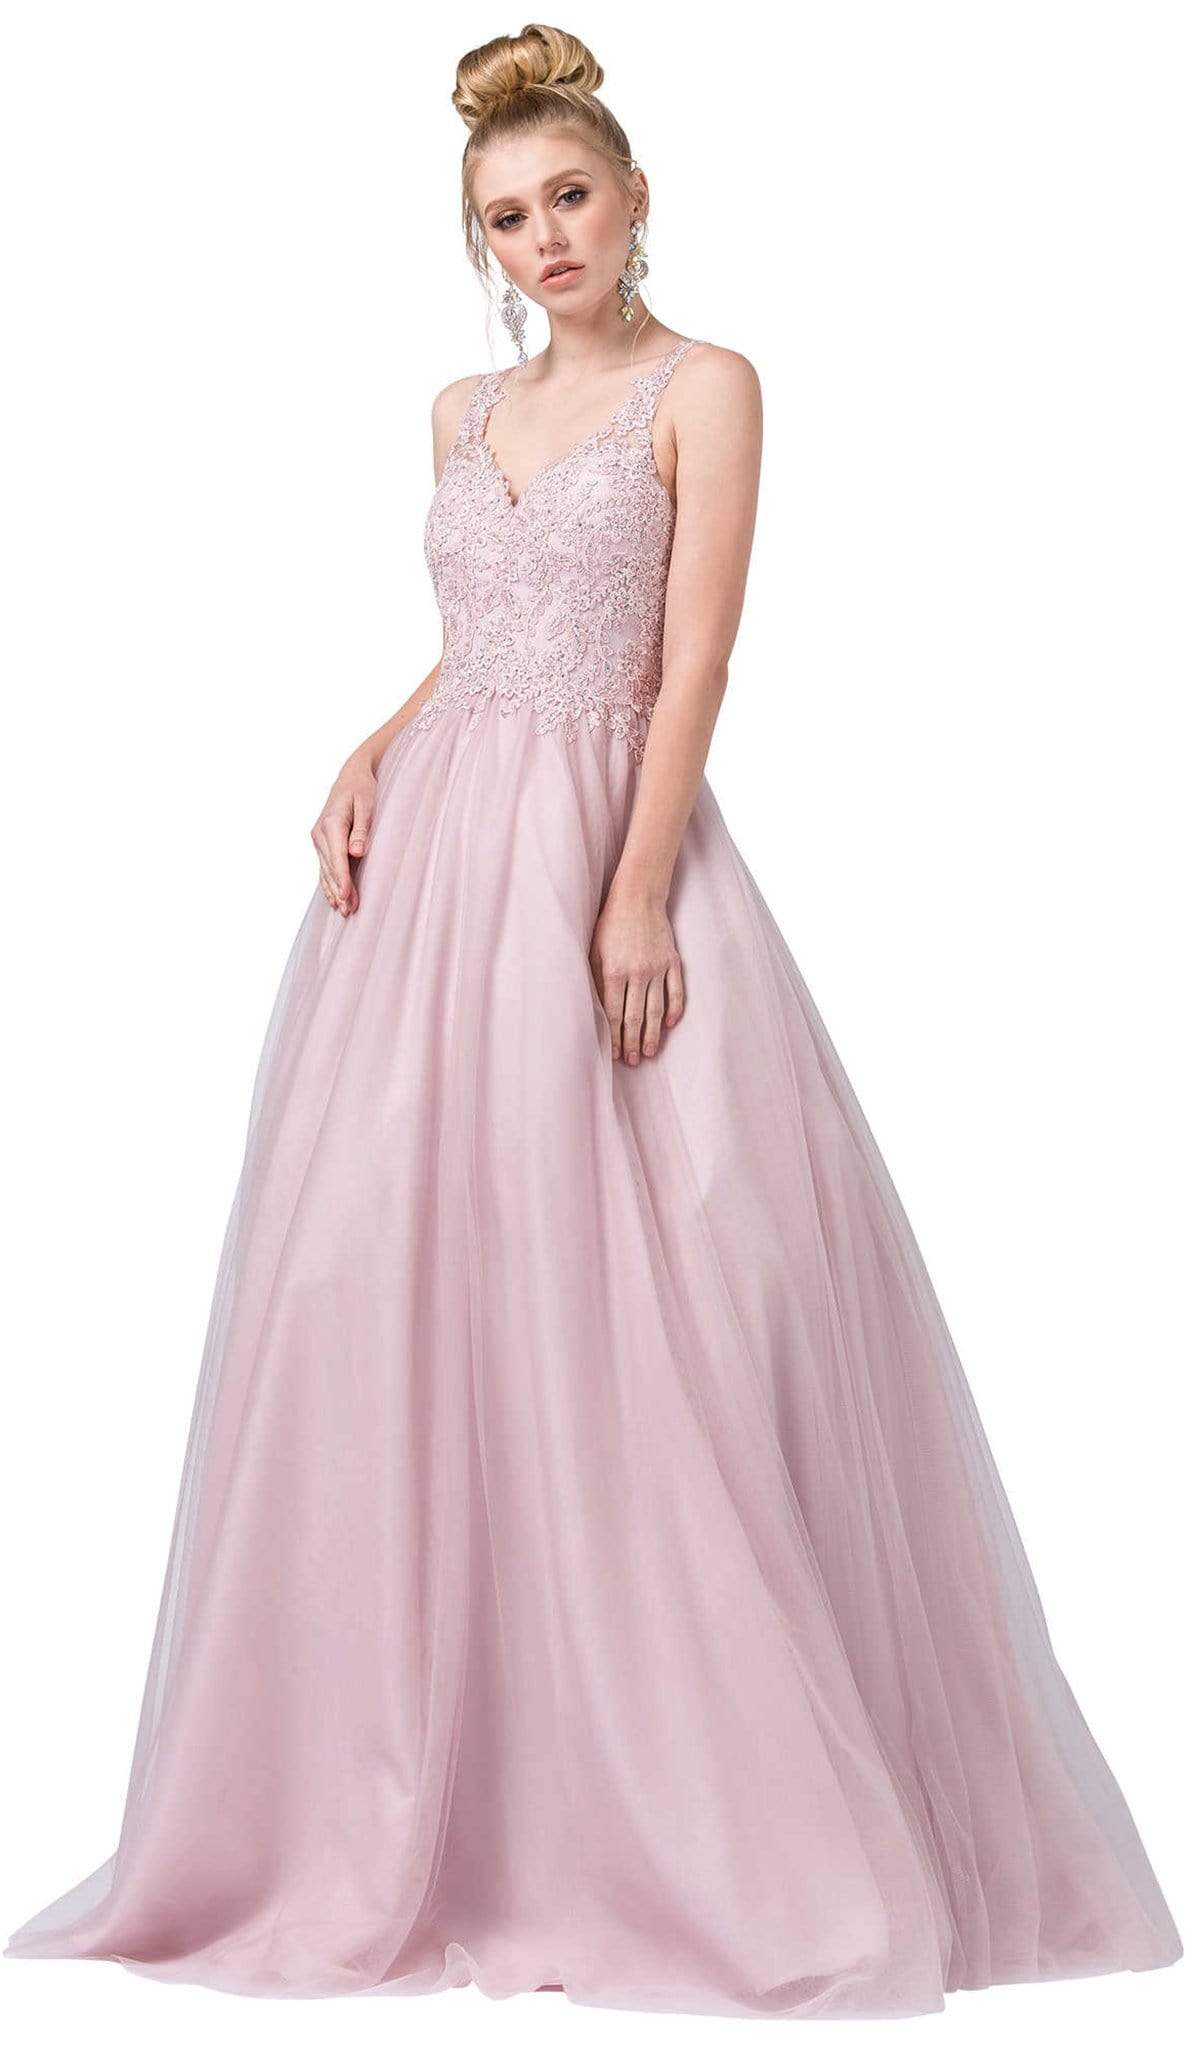 Dancing Queen - 2626 Embroidered V-neck Ballgown
